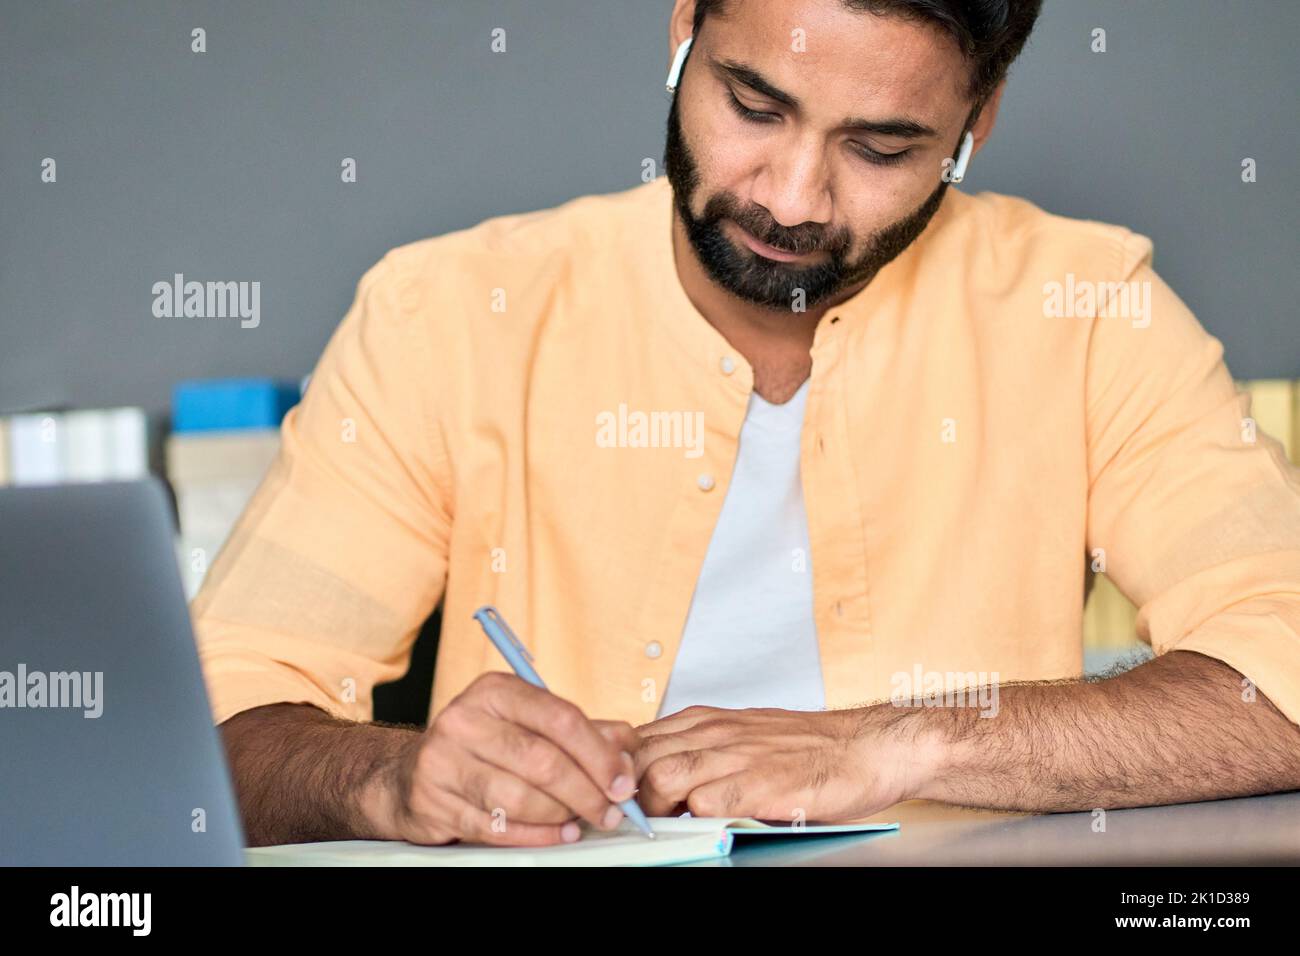 Indian man writing notes while learning online business education course. Stock Photo